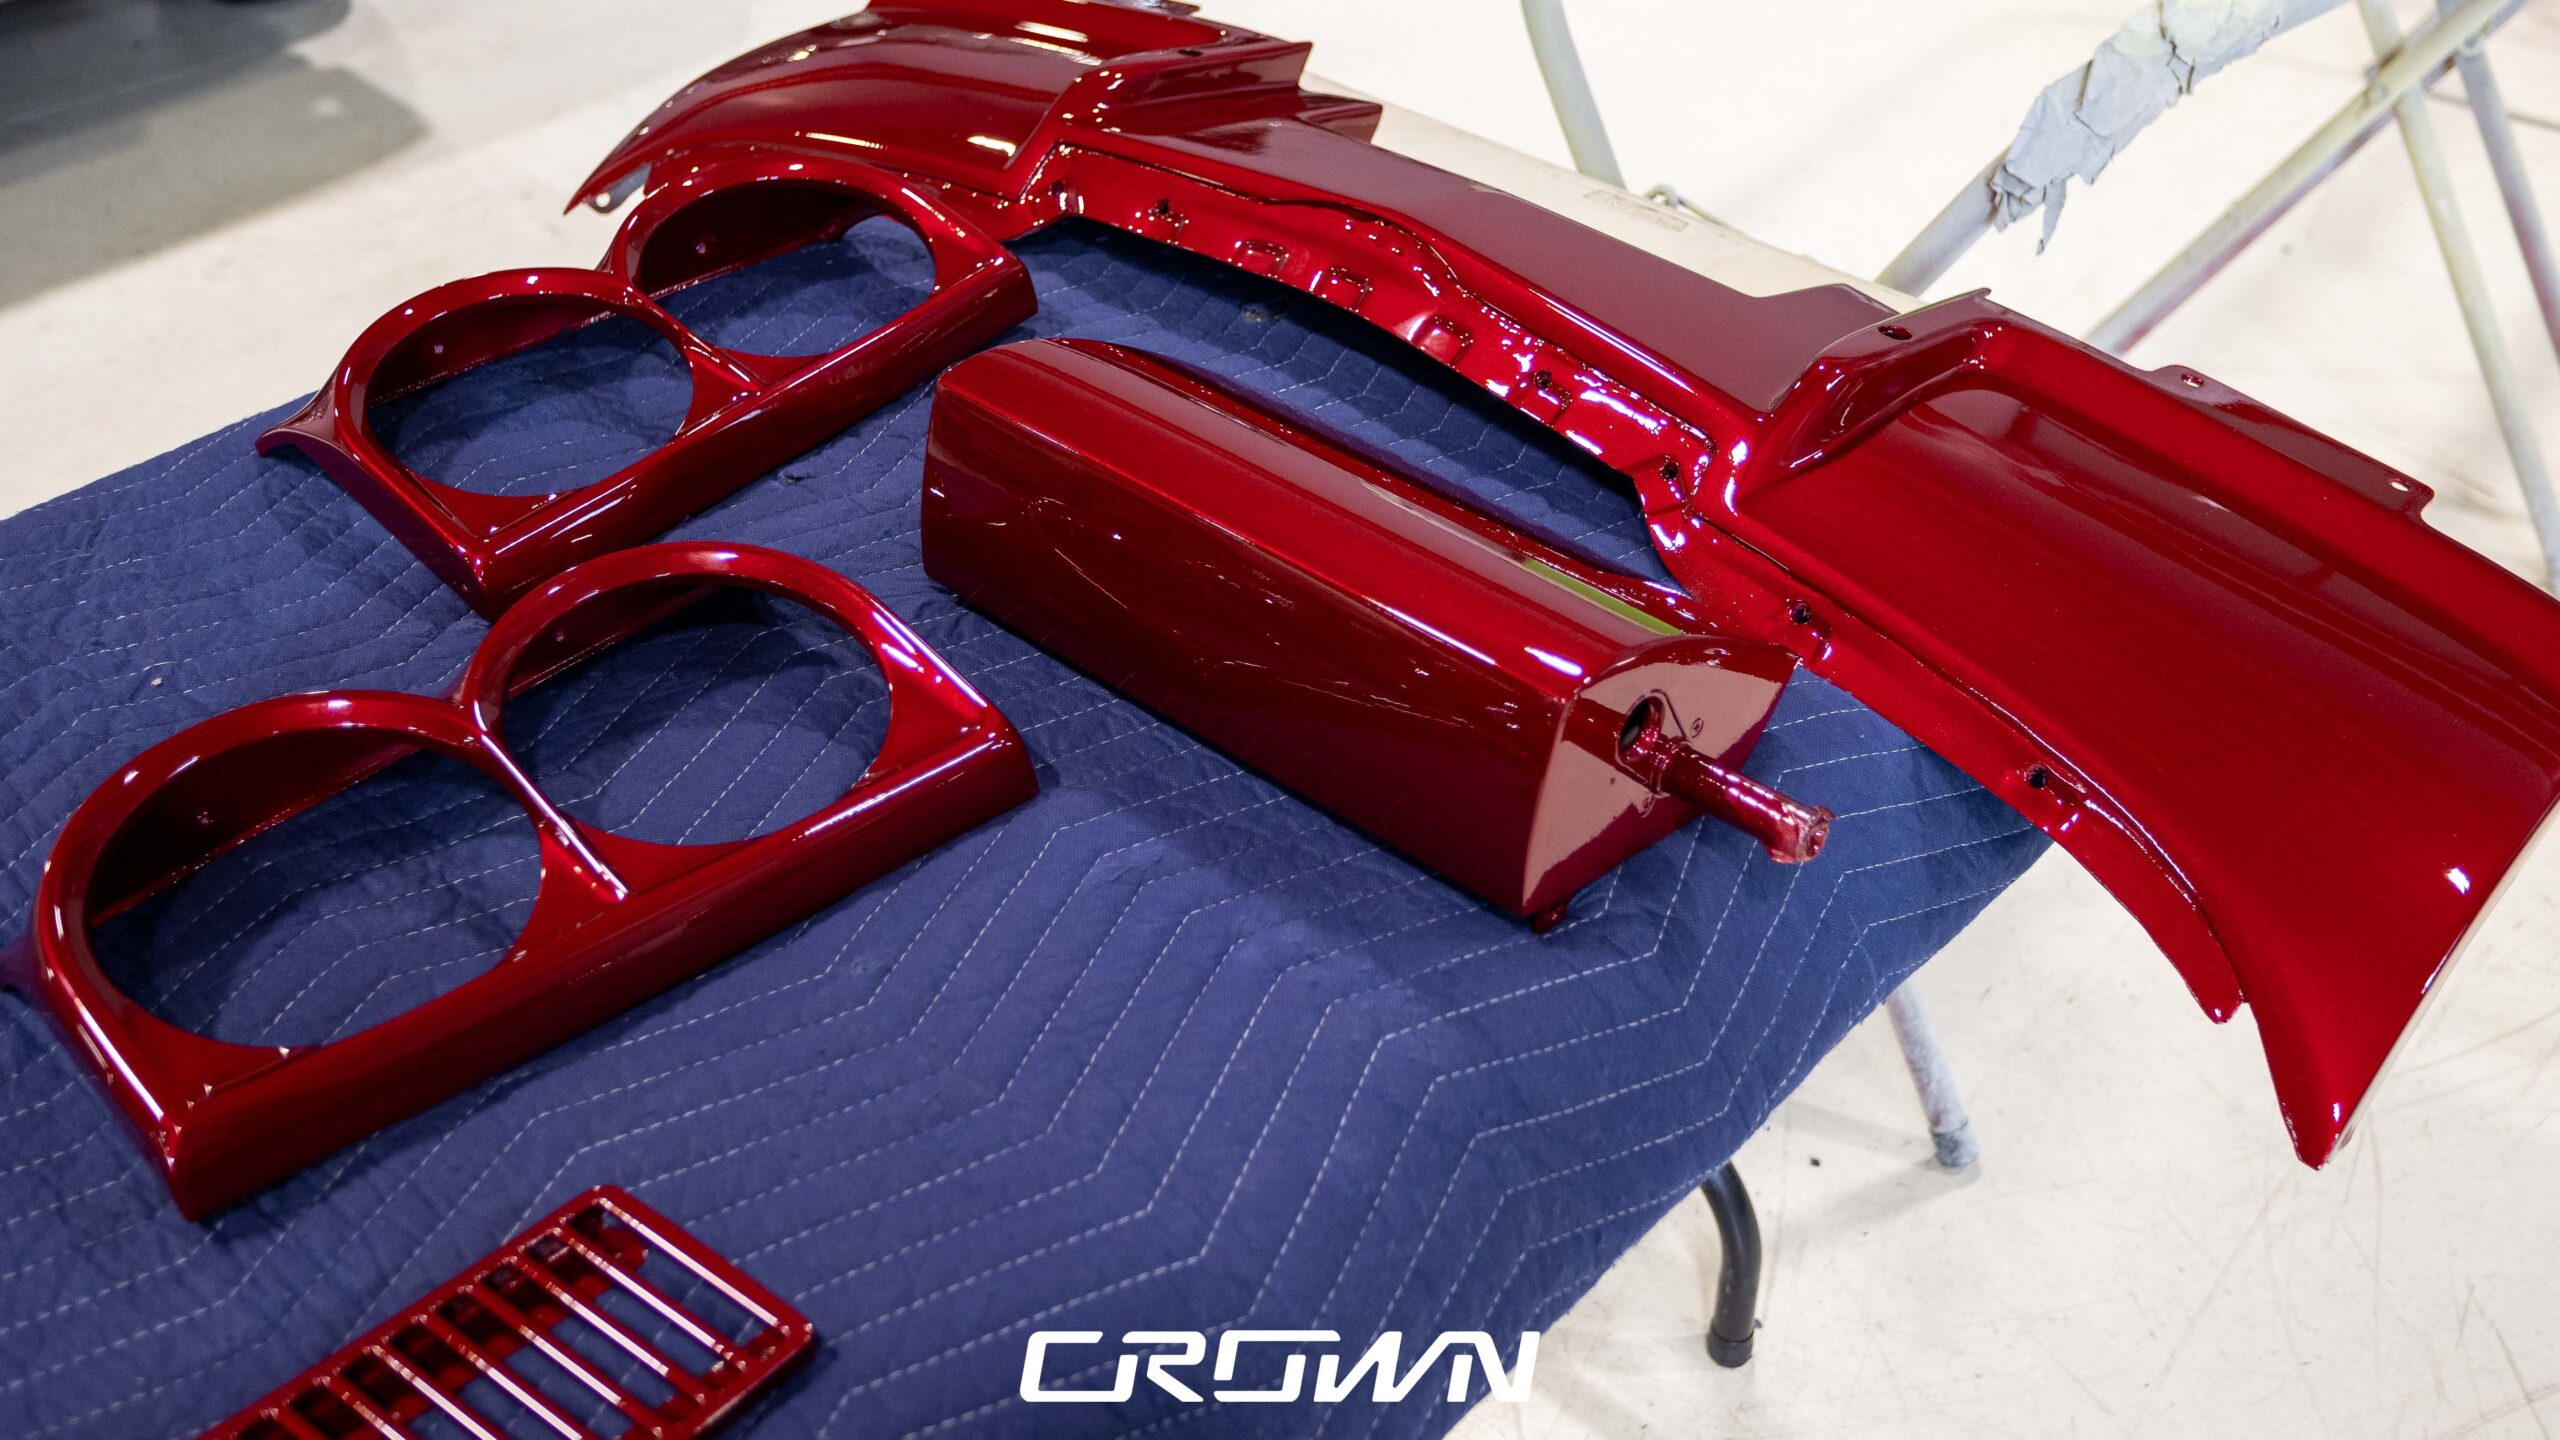 Crown Customs Barrett-Jackson Cup Entry Gets Some Color.